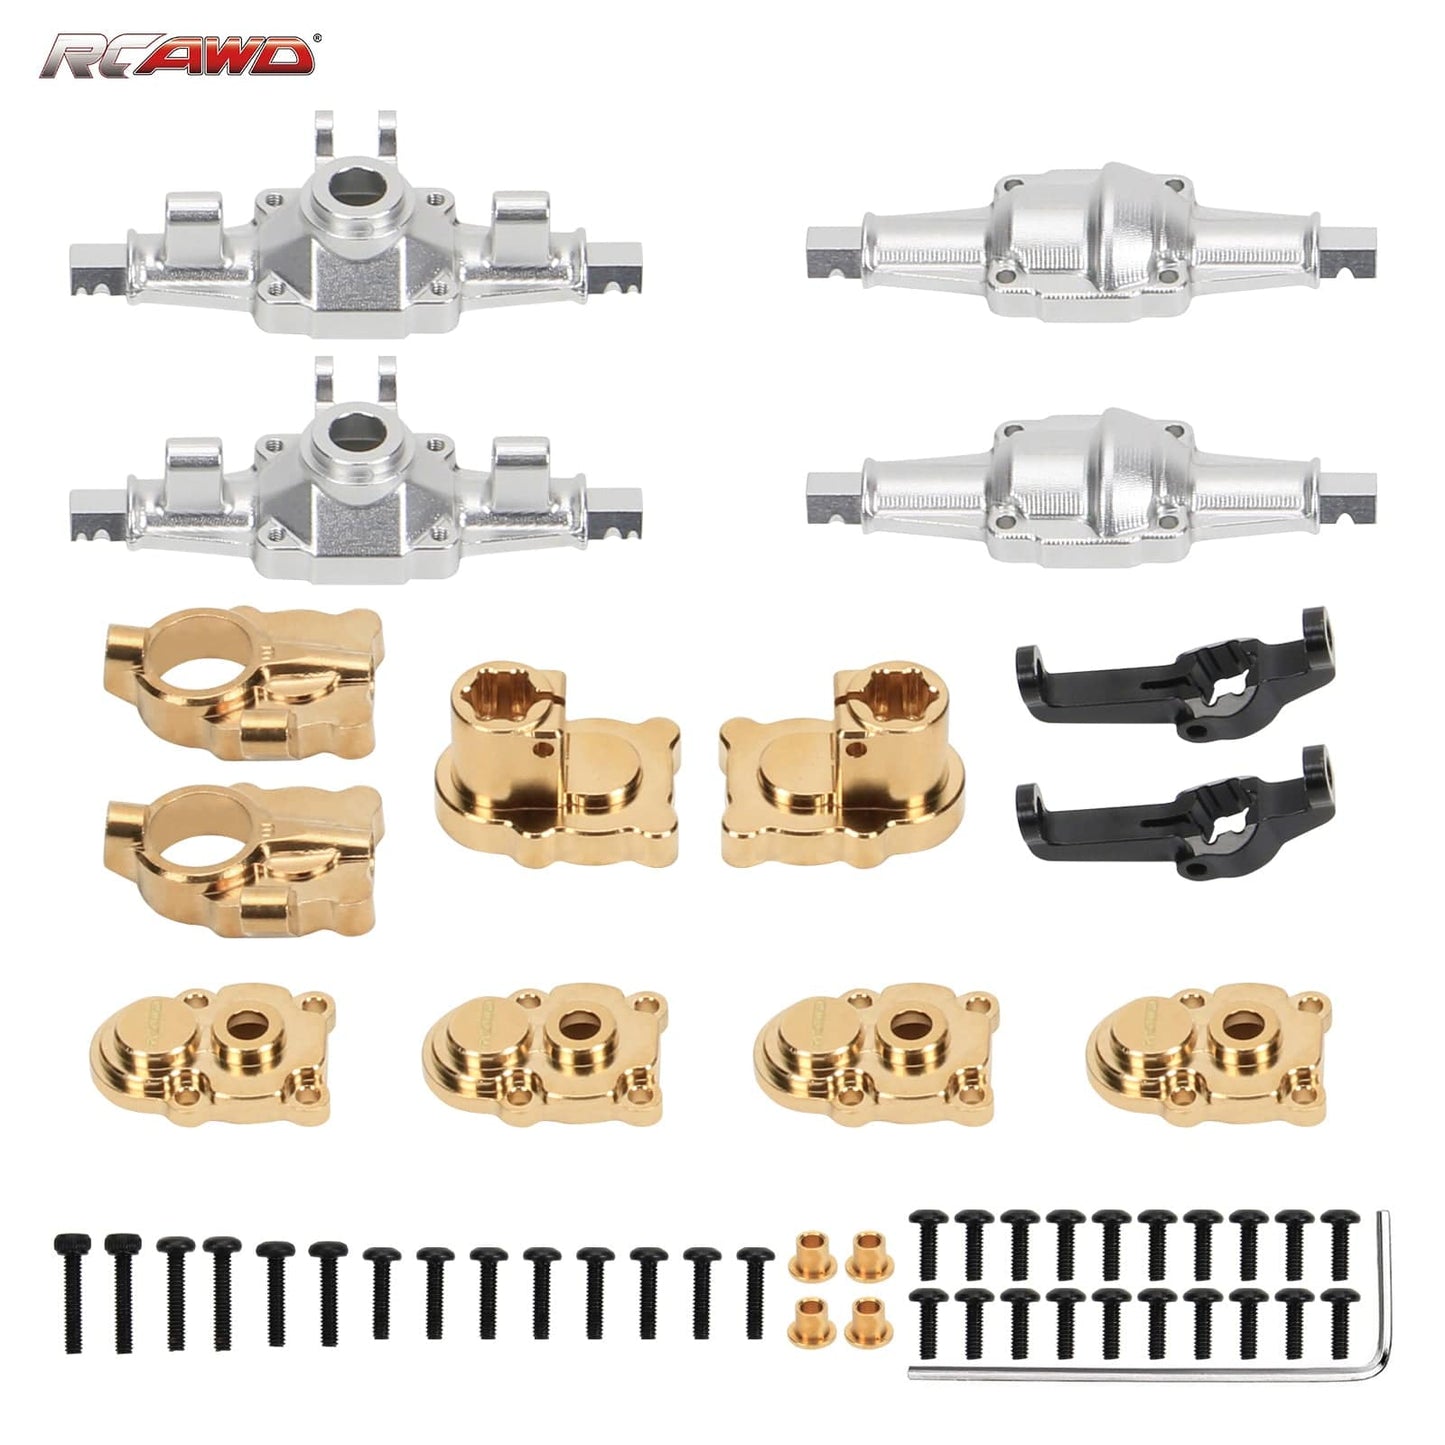 RCAWD FMS FCX24 Silver / Full set RCAWD FMS FCX24 Upgrades Aluminum Axles Housing